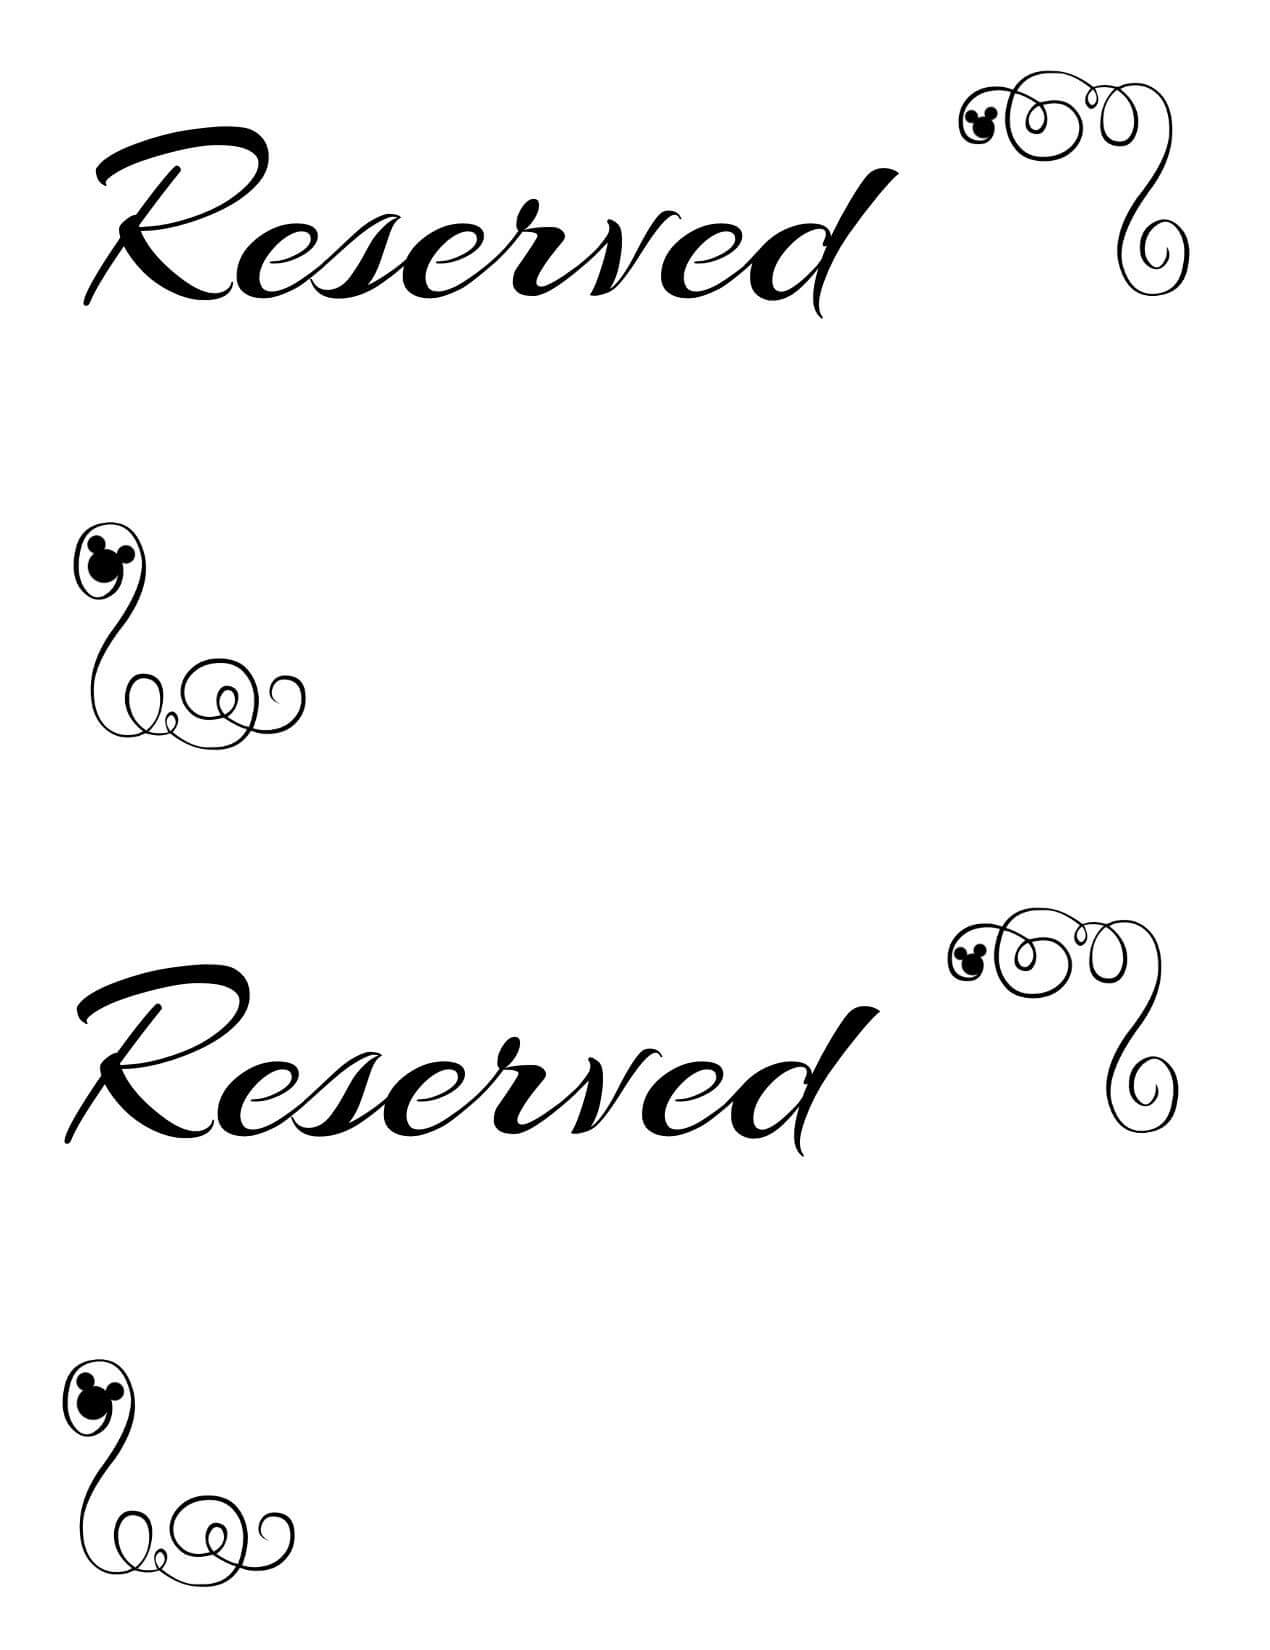 Free Printable Reserved Seating Signs For Your Wedding With Reserved Cards For Tables Templates